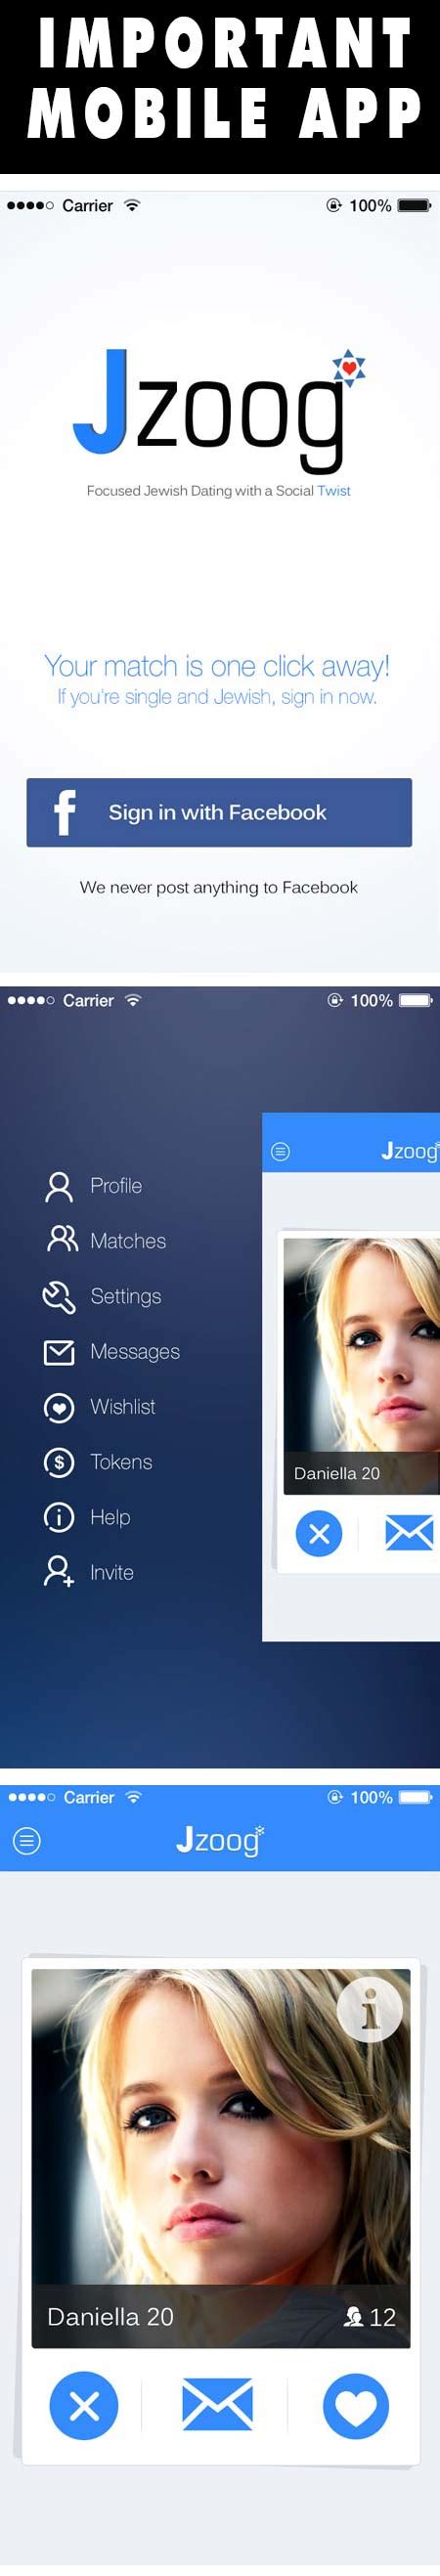 Getting started with dating apps. Jzoog | Dating apps, Girlfriend humor